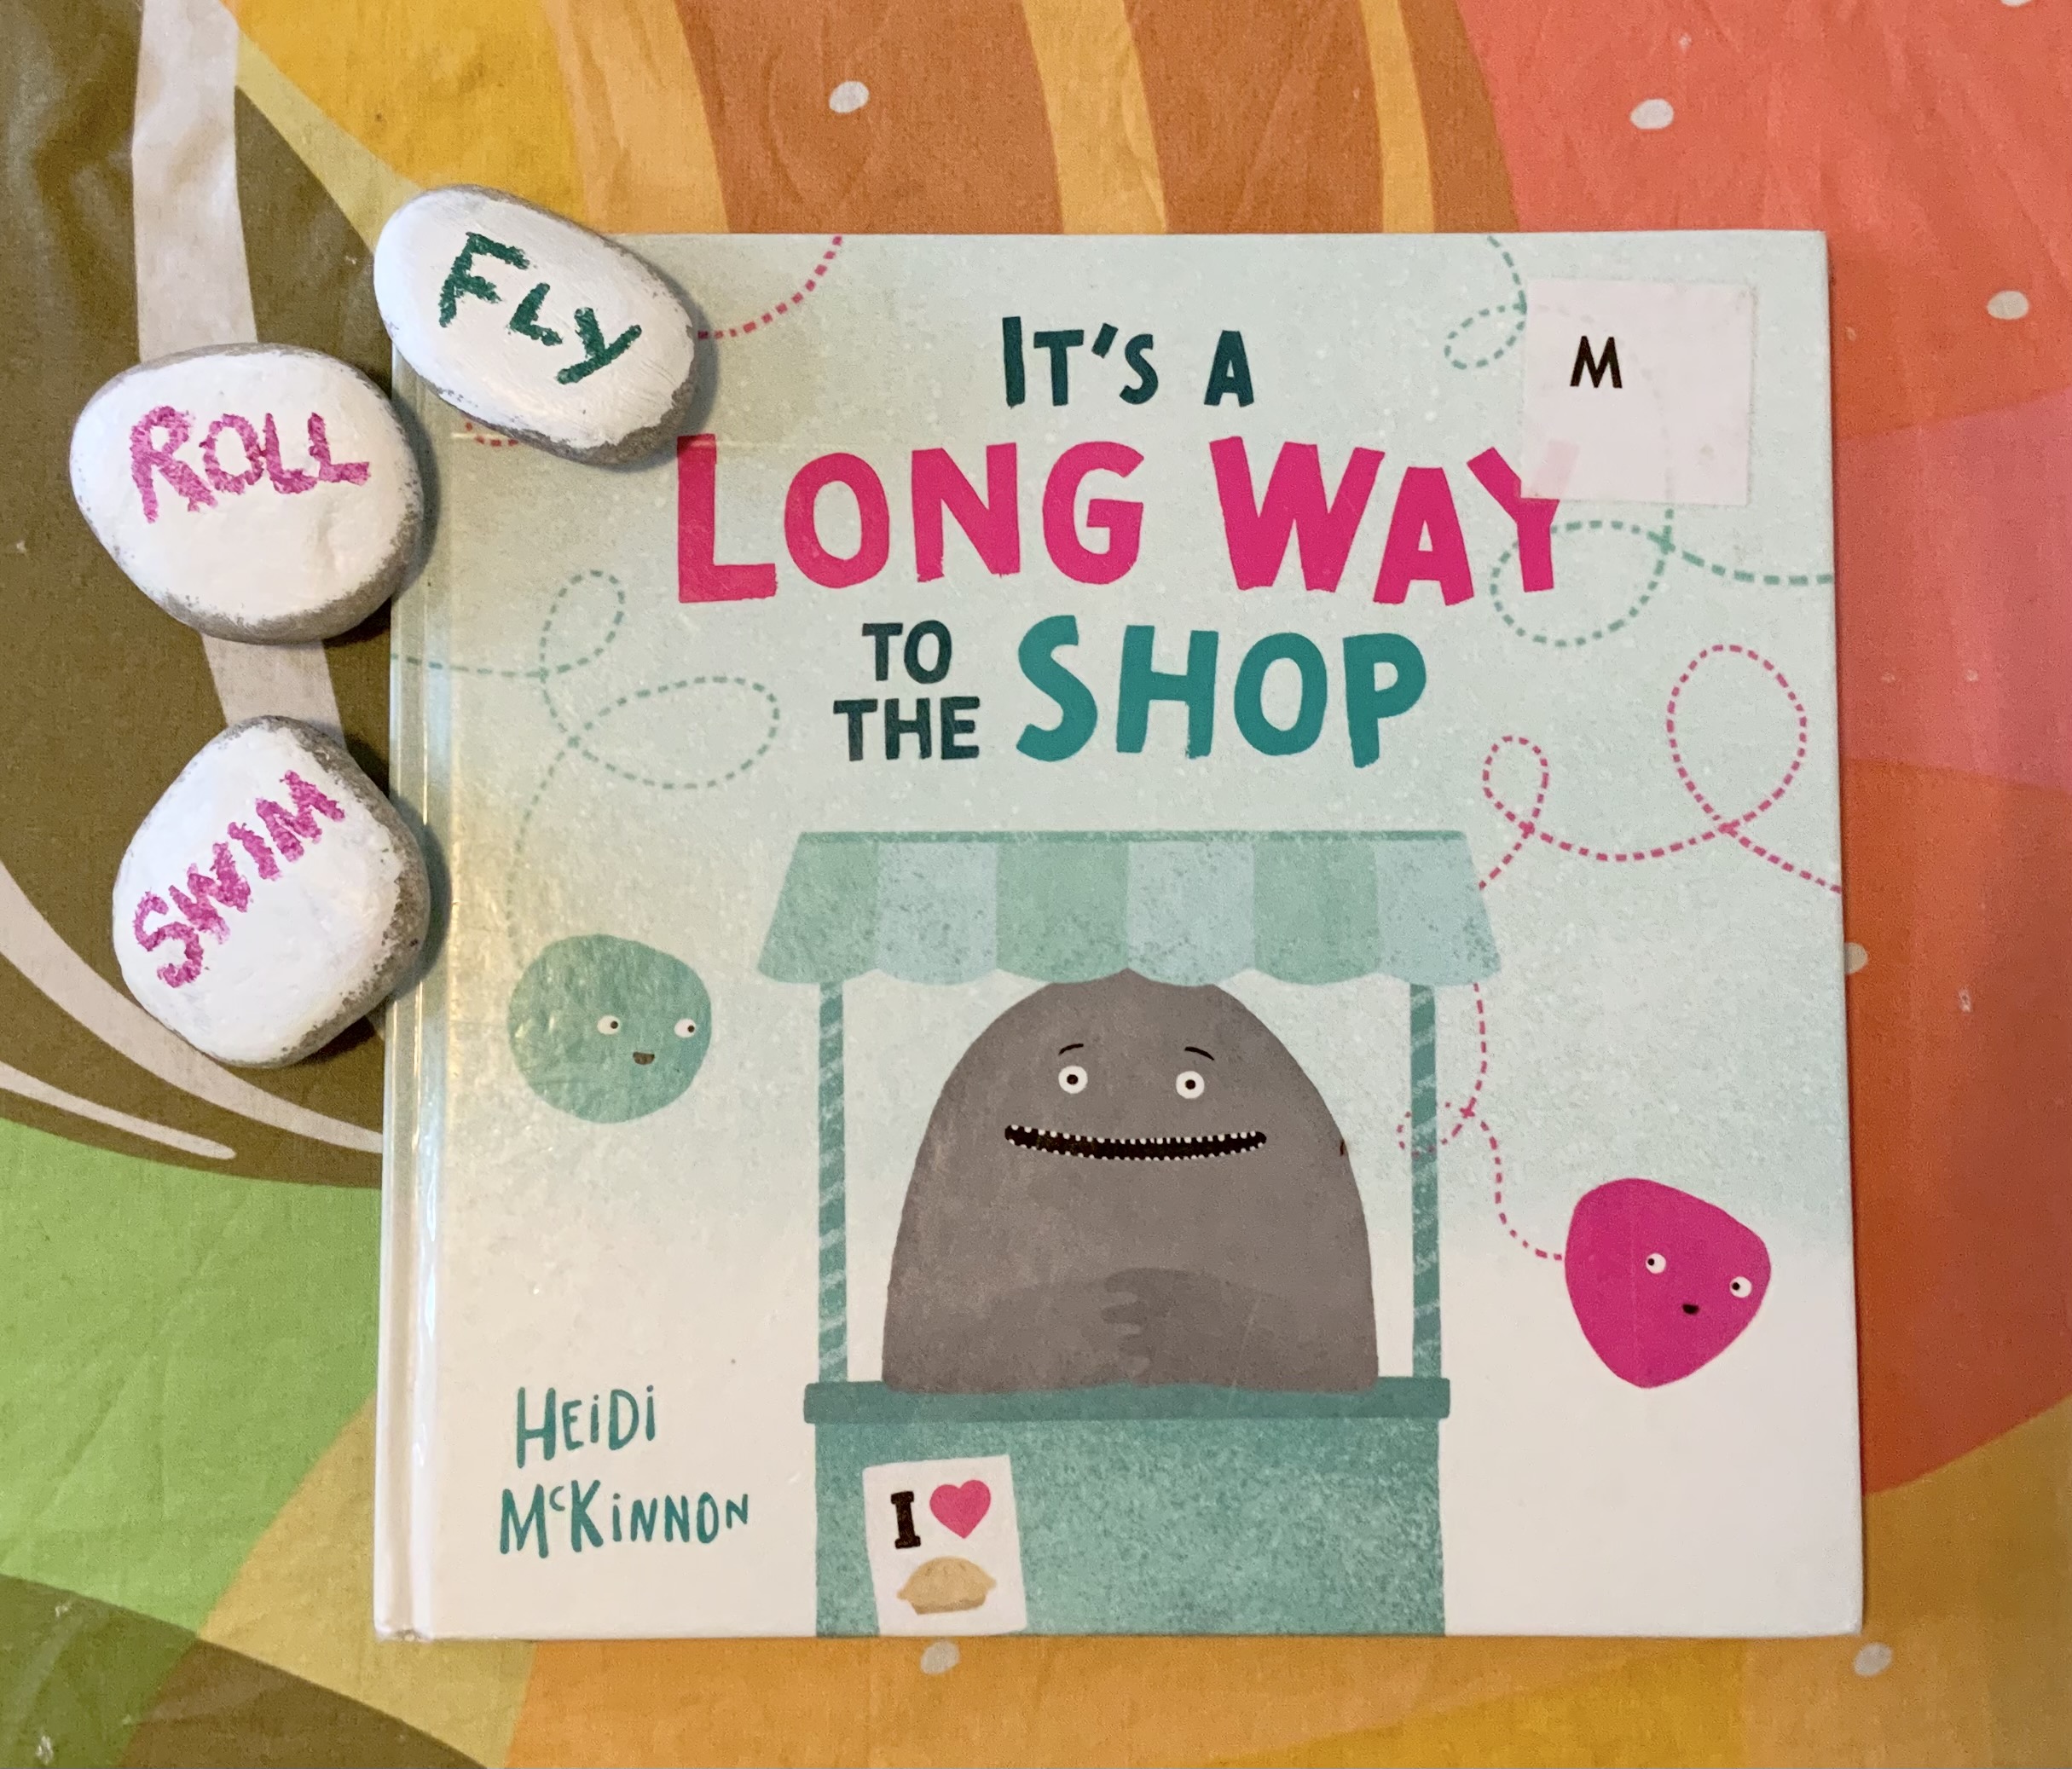 A fun reading lesson for grades 1-3 that explores action verbs from a quality picture book. Here we’ve used rocks to record some of the action verbs from the book It’s a Long Way to the Shop by Heidi Mckinnon. These action verbs will become dance moves in the rock concert at the end of the lesson.